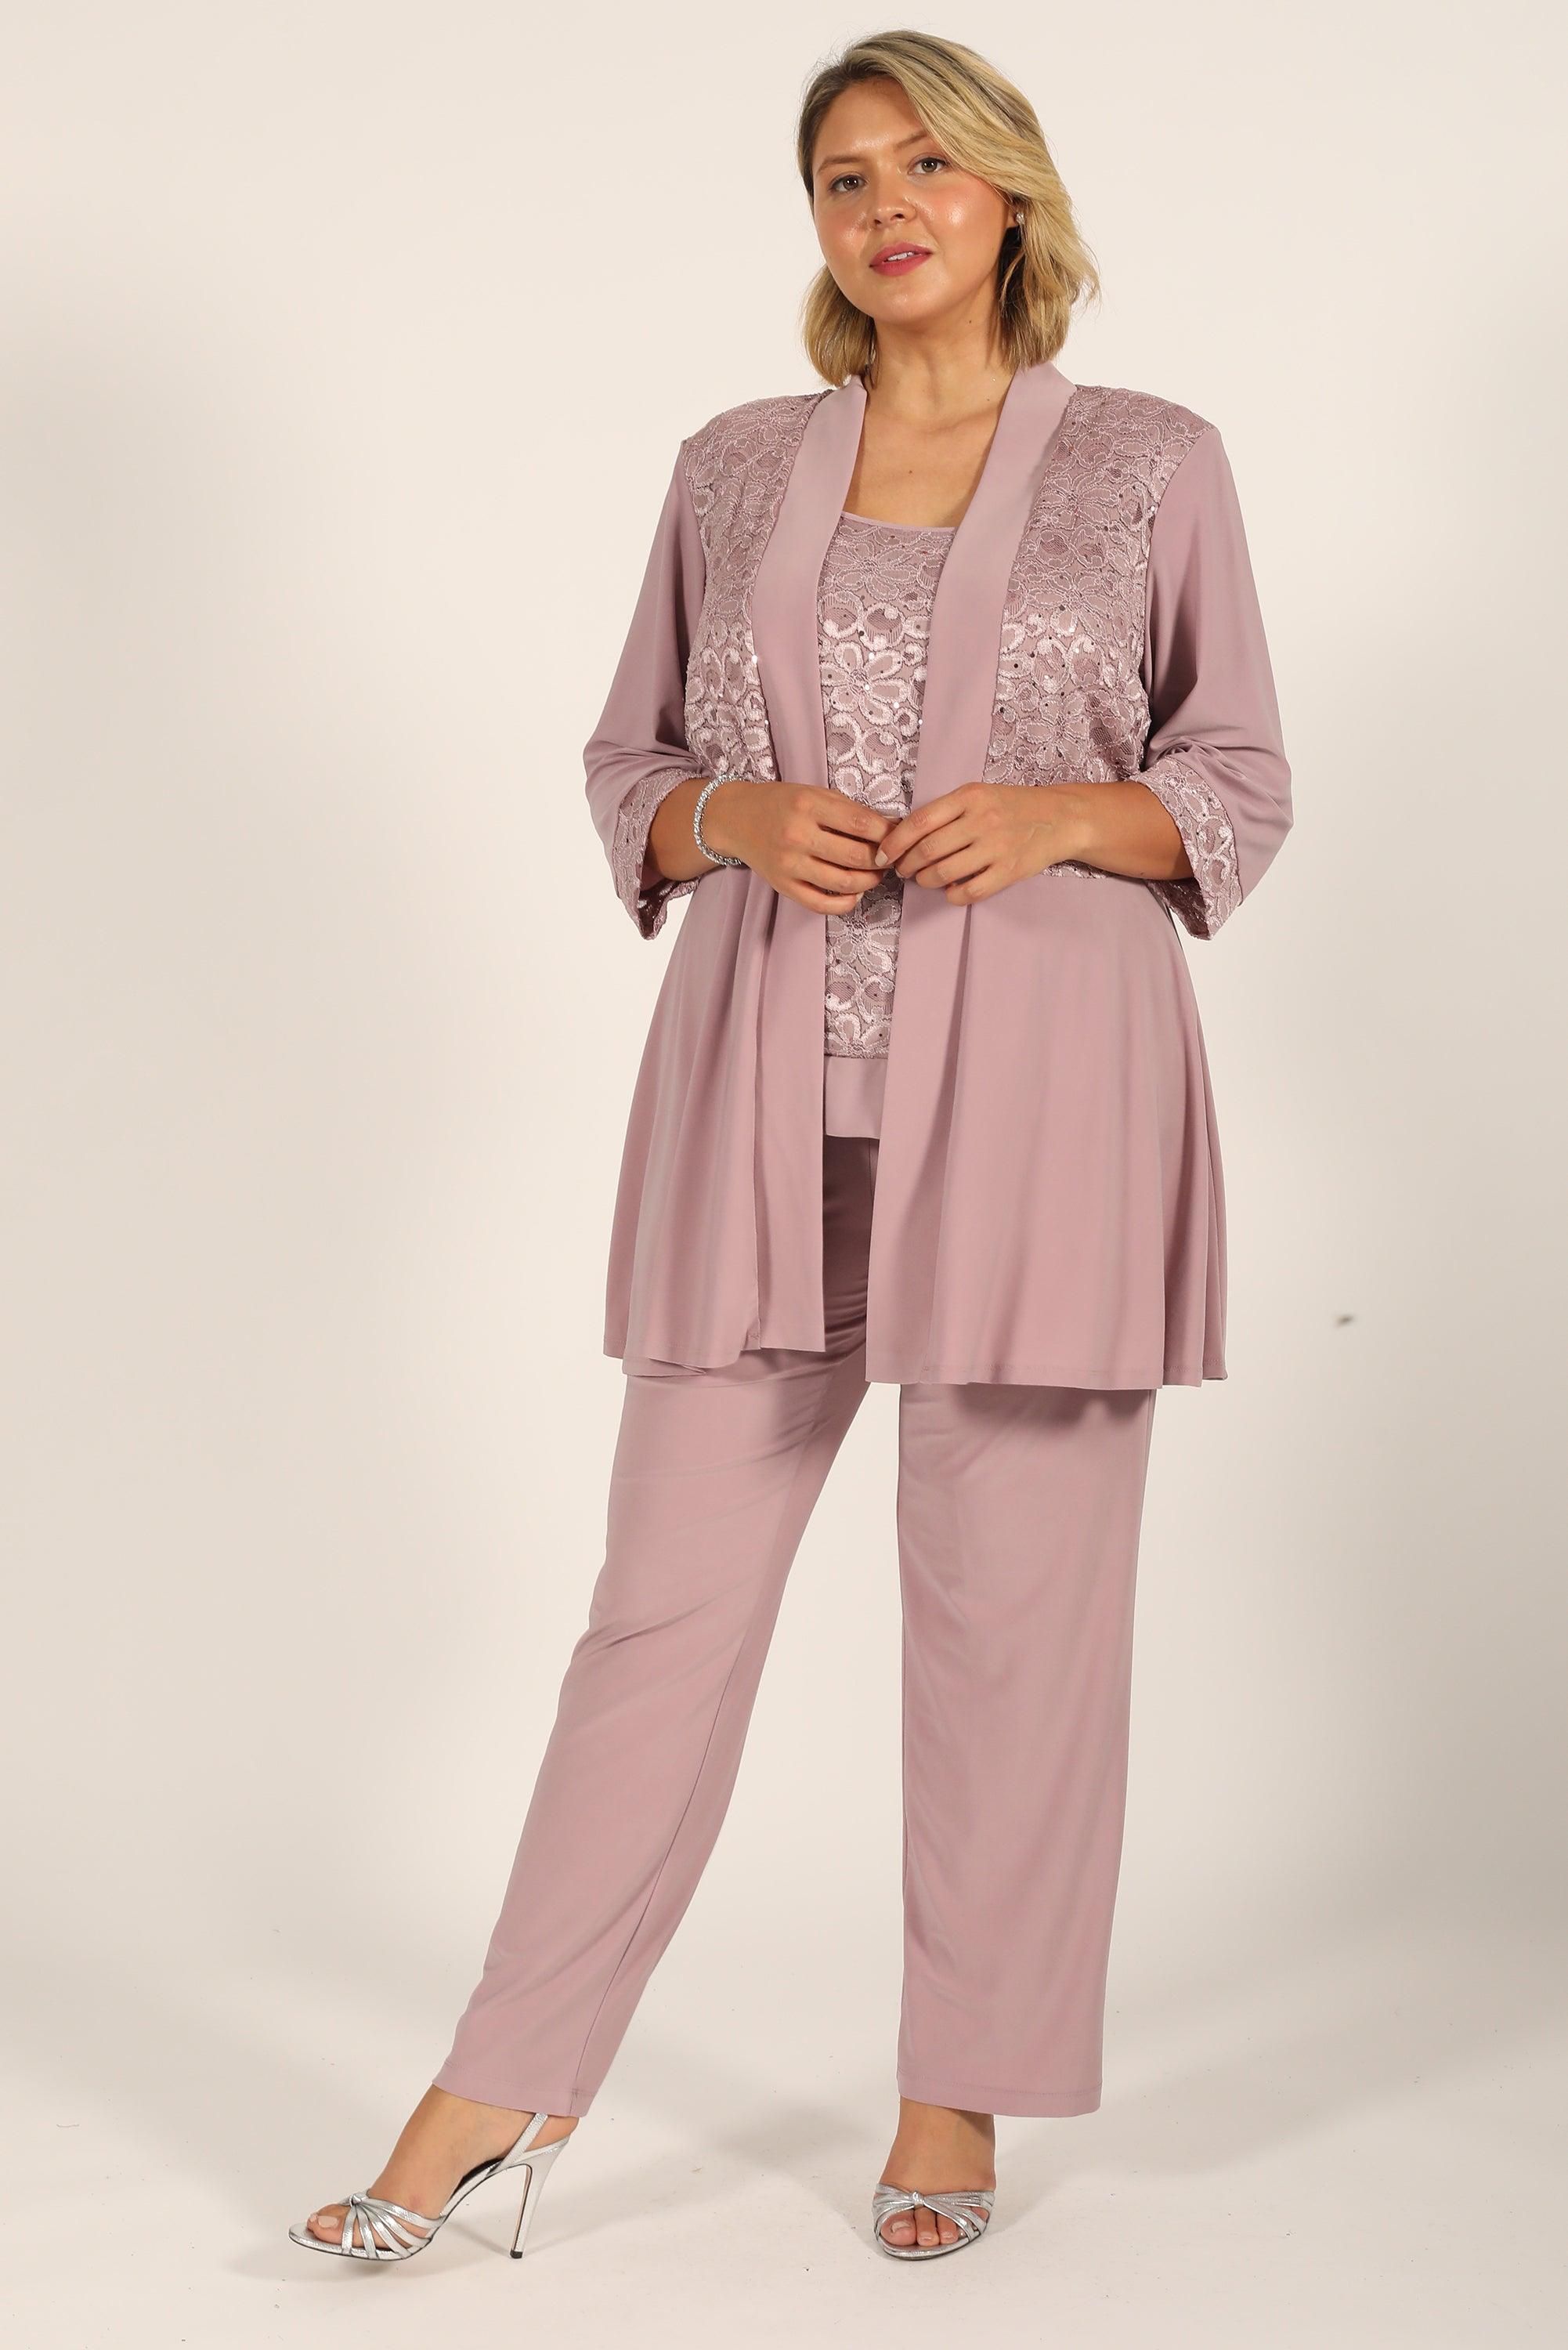 Ru0026M Richards 7772W Mother Of The Bride Formal Plus Size Pant Suit for  $46.99 – The Dress Outlet